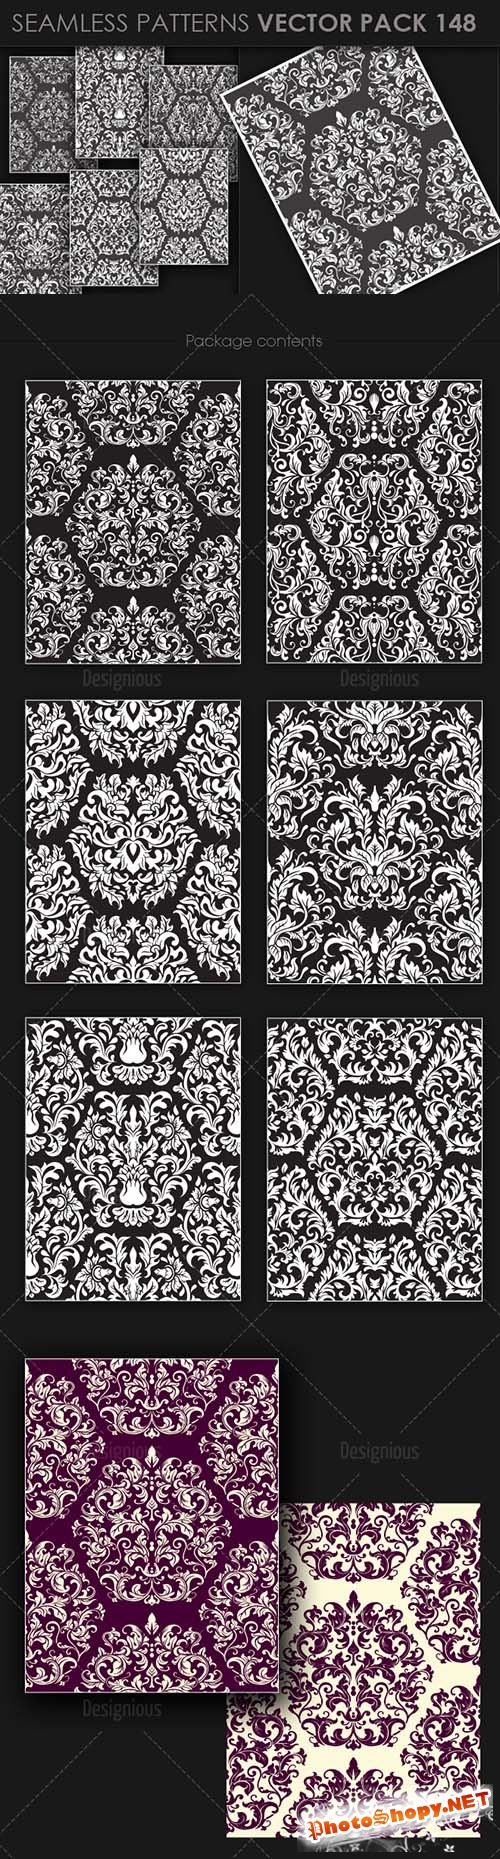 Seamless Patterns Vector Pack 148